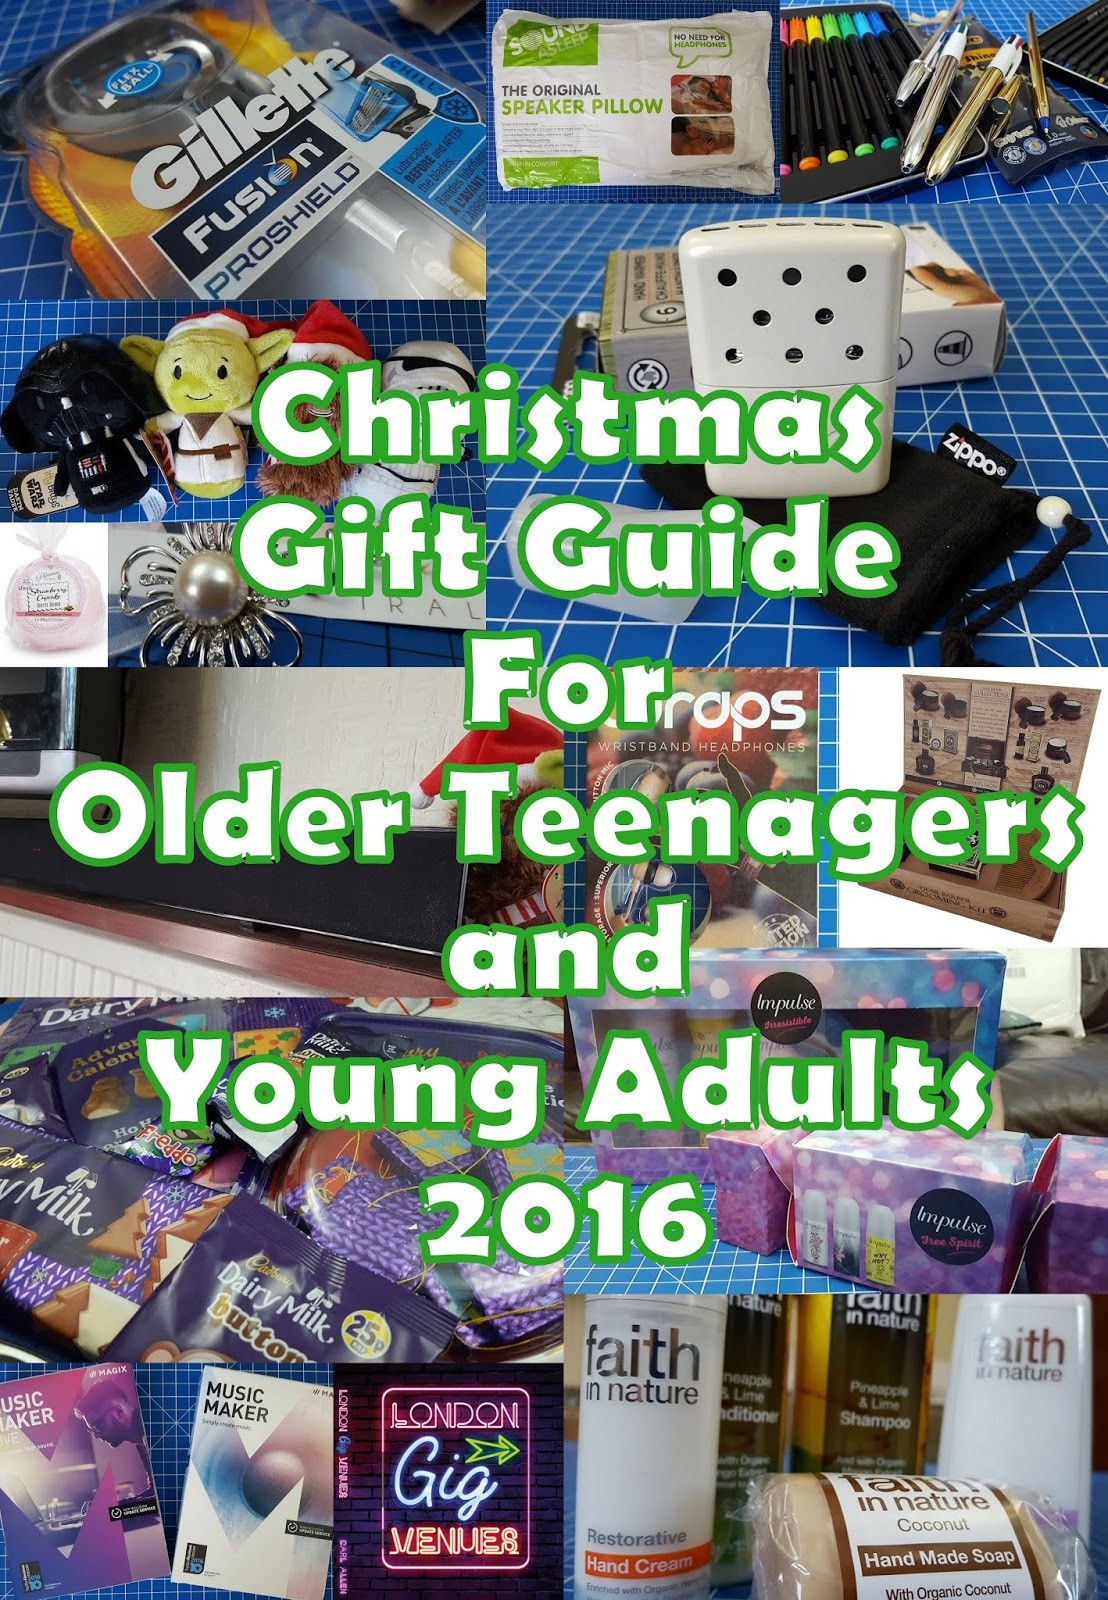 Christmas Ideas For Young Adults
 The Brick Castle Older Teenagers and Young Adult s Gift